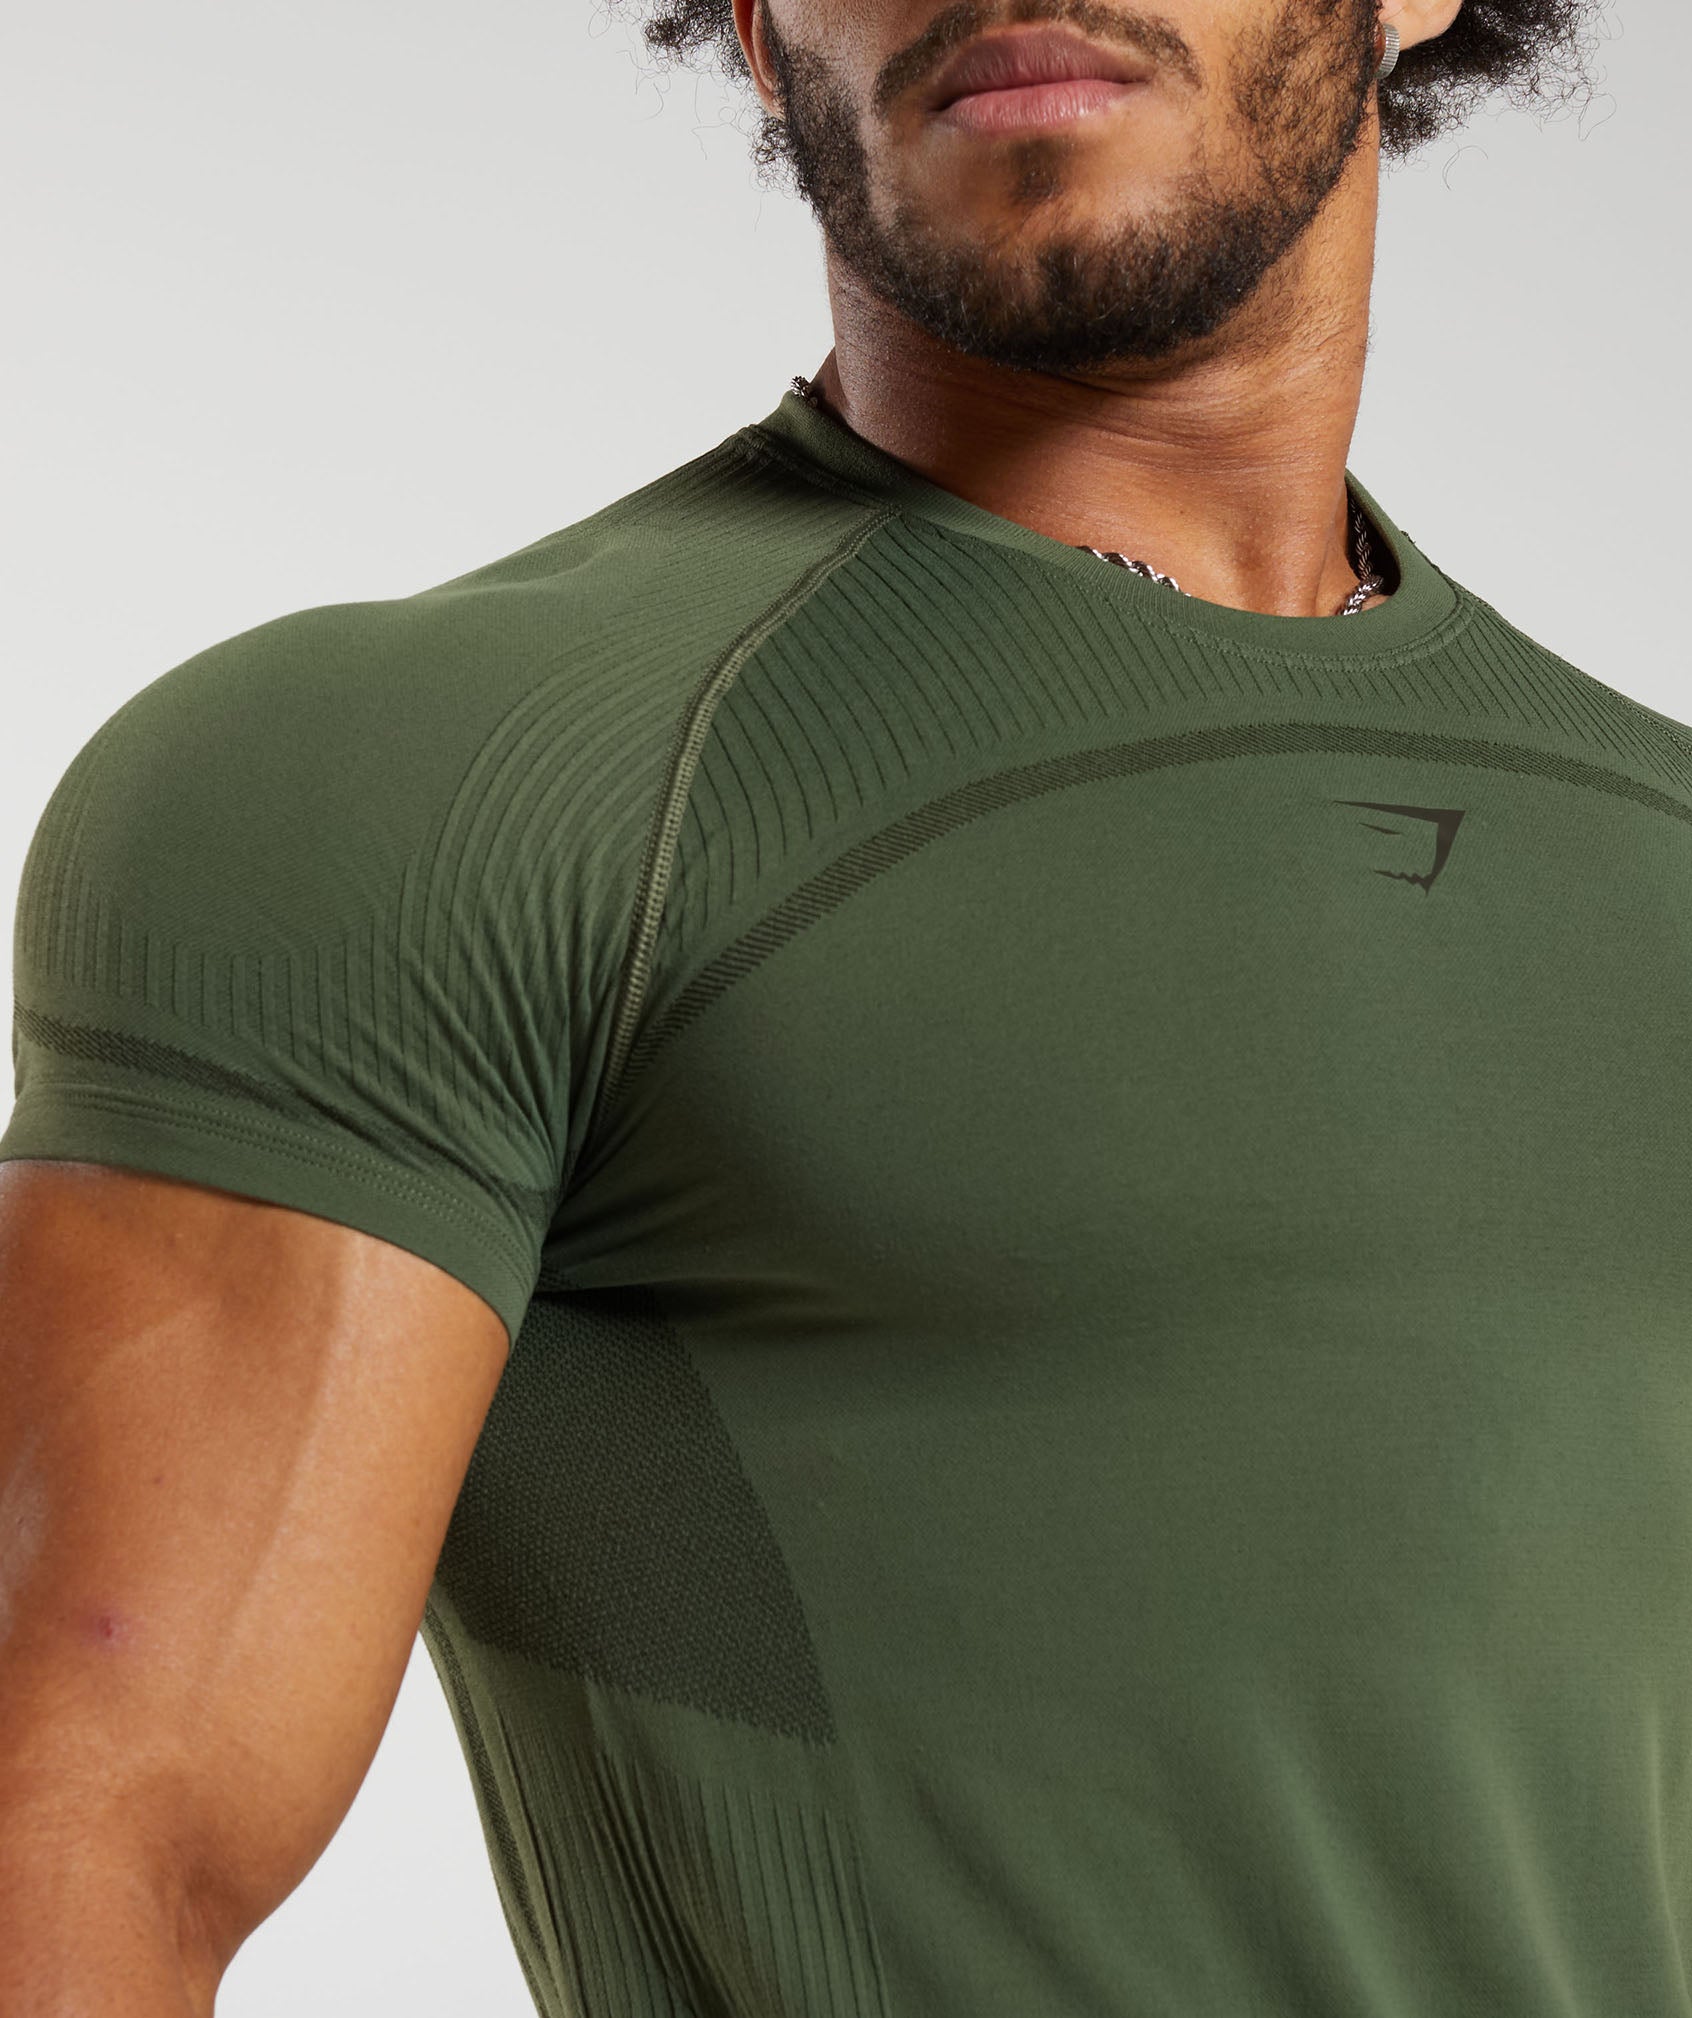 315 Seamless T-Shirt in Core Olive/Deep Olive Green - view 6